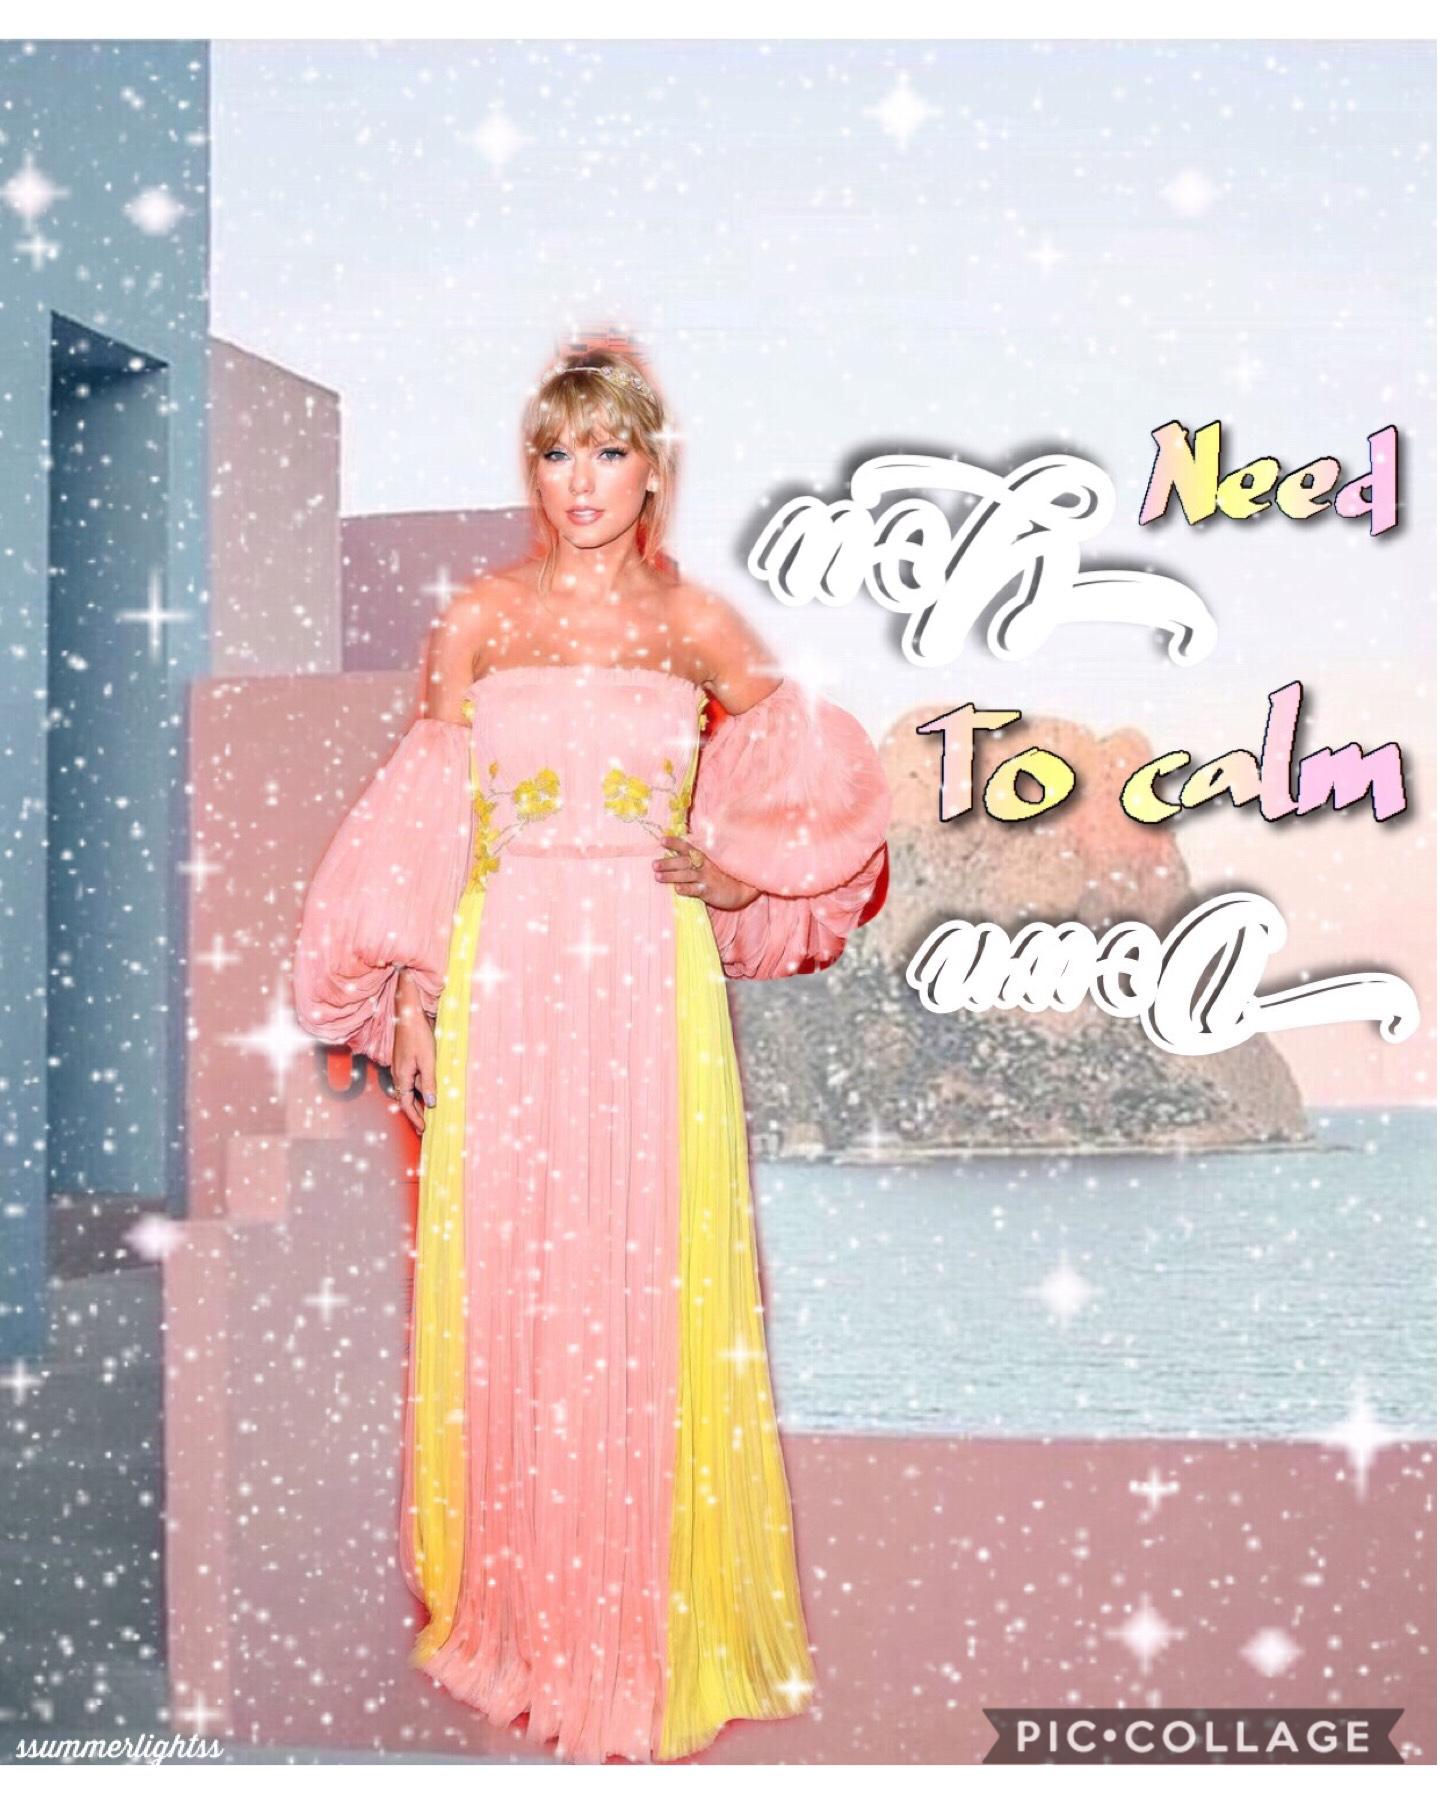 I love tay tay 2nd post by ssummerlightss my new acc name AKA I’m still britkitten but yeah 😘😘😘 QOTD- fave tay tay song? AOTD- soooo hard to choose